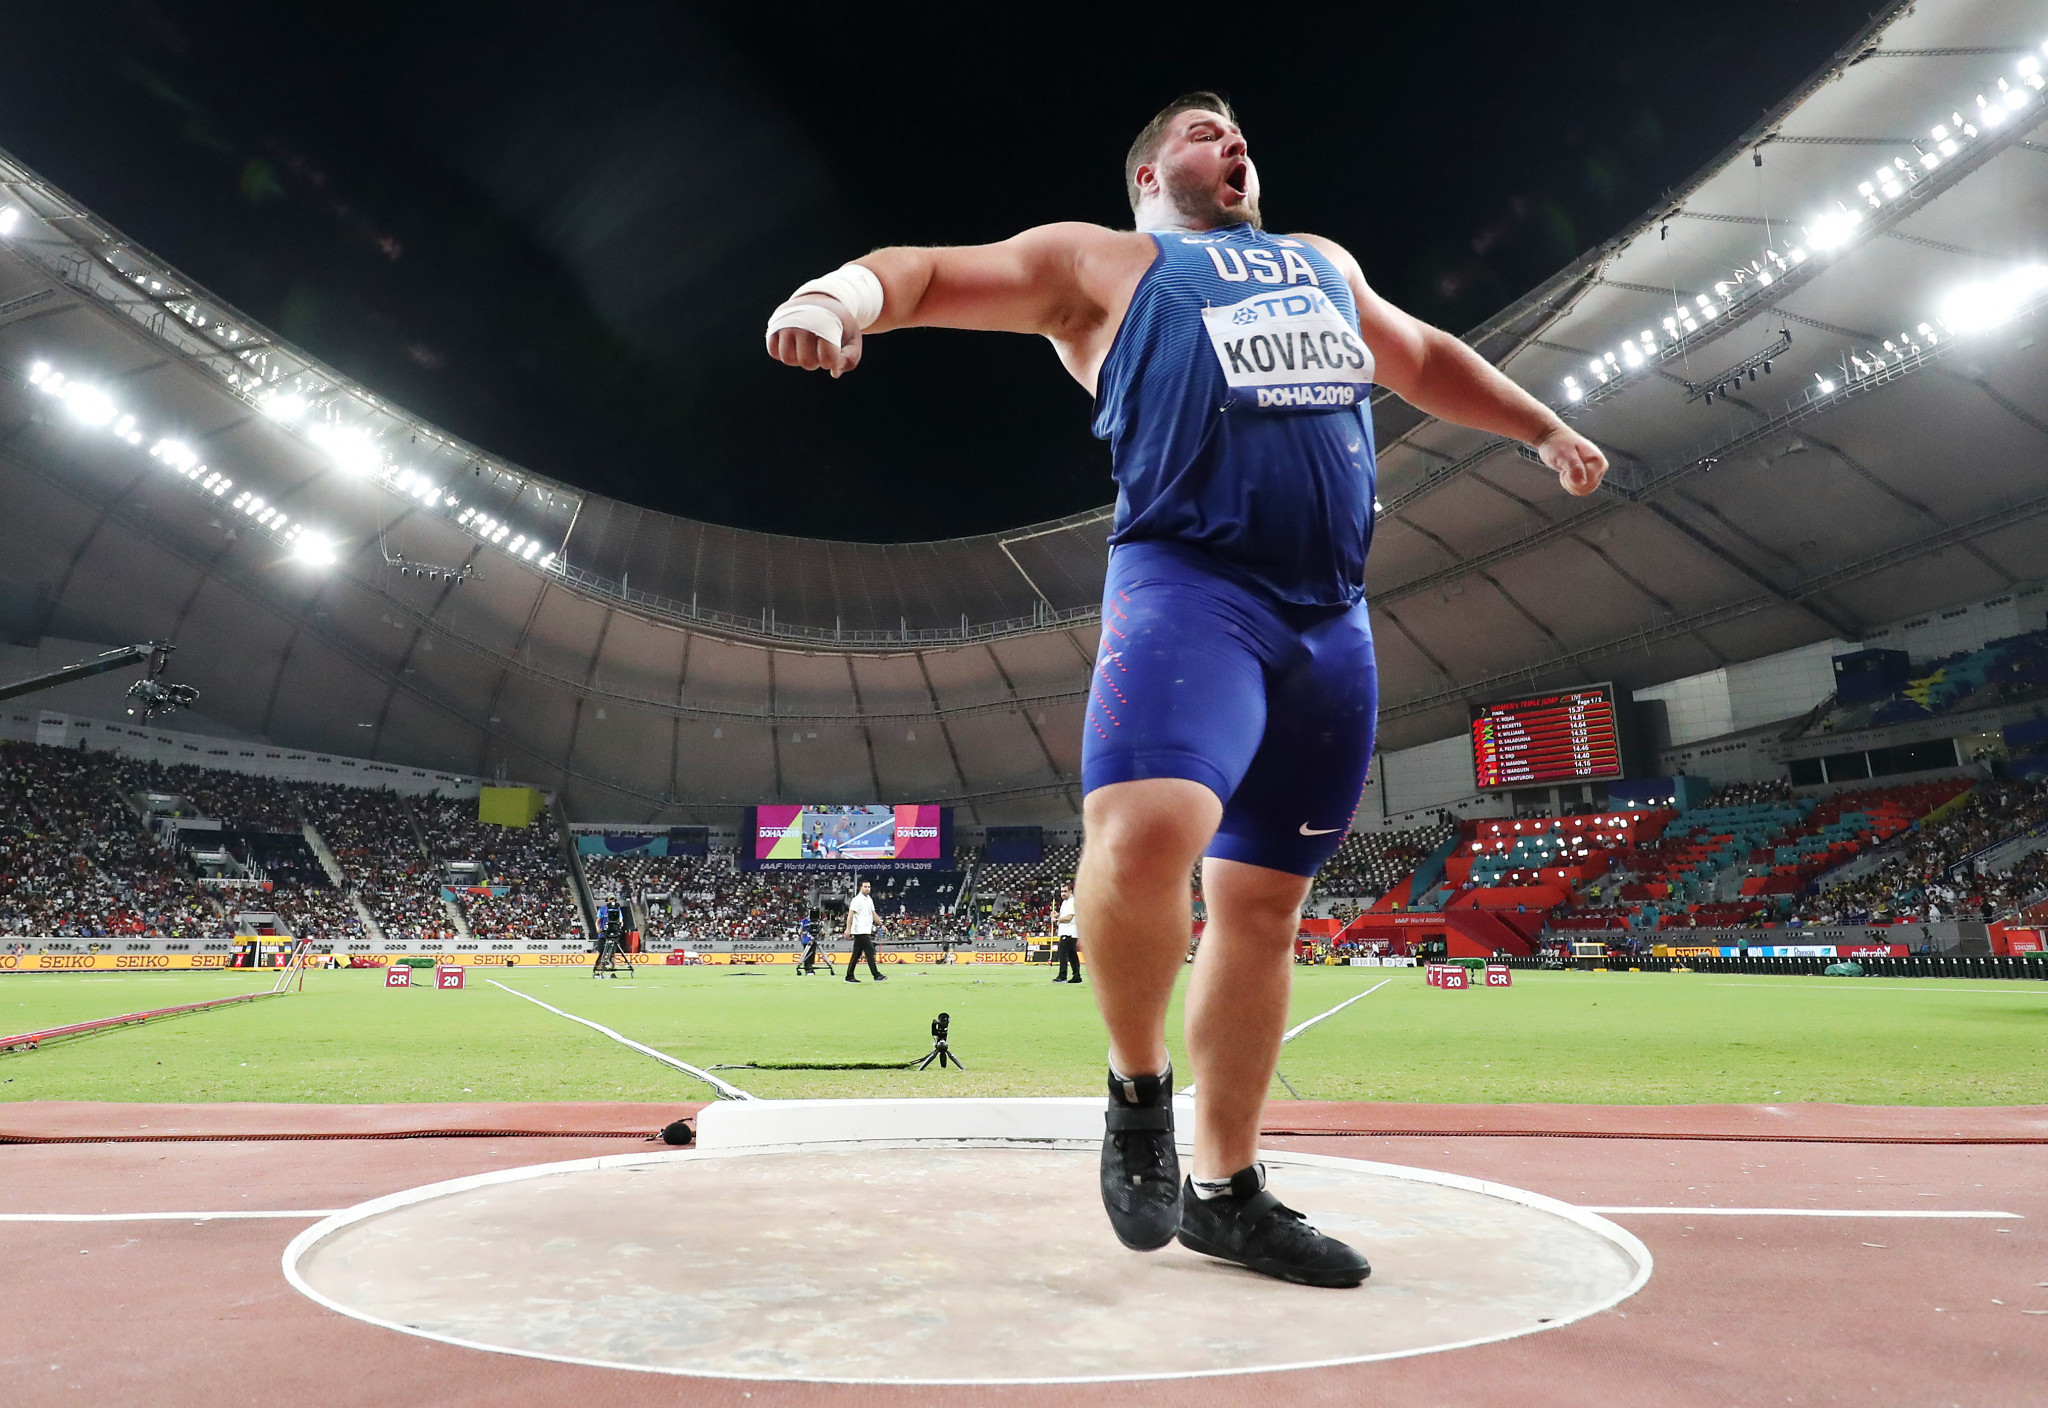 Joe Kovacs regained his world shot put title with a last effort of 22.91m - the third best ever recorded - to win a titanic battle in which the top three all finished within one centimetre of each other ©Getty Images